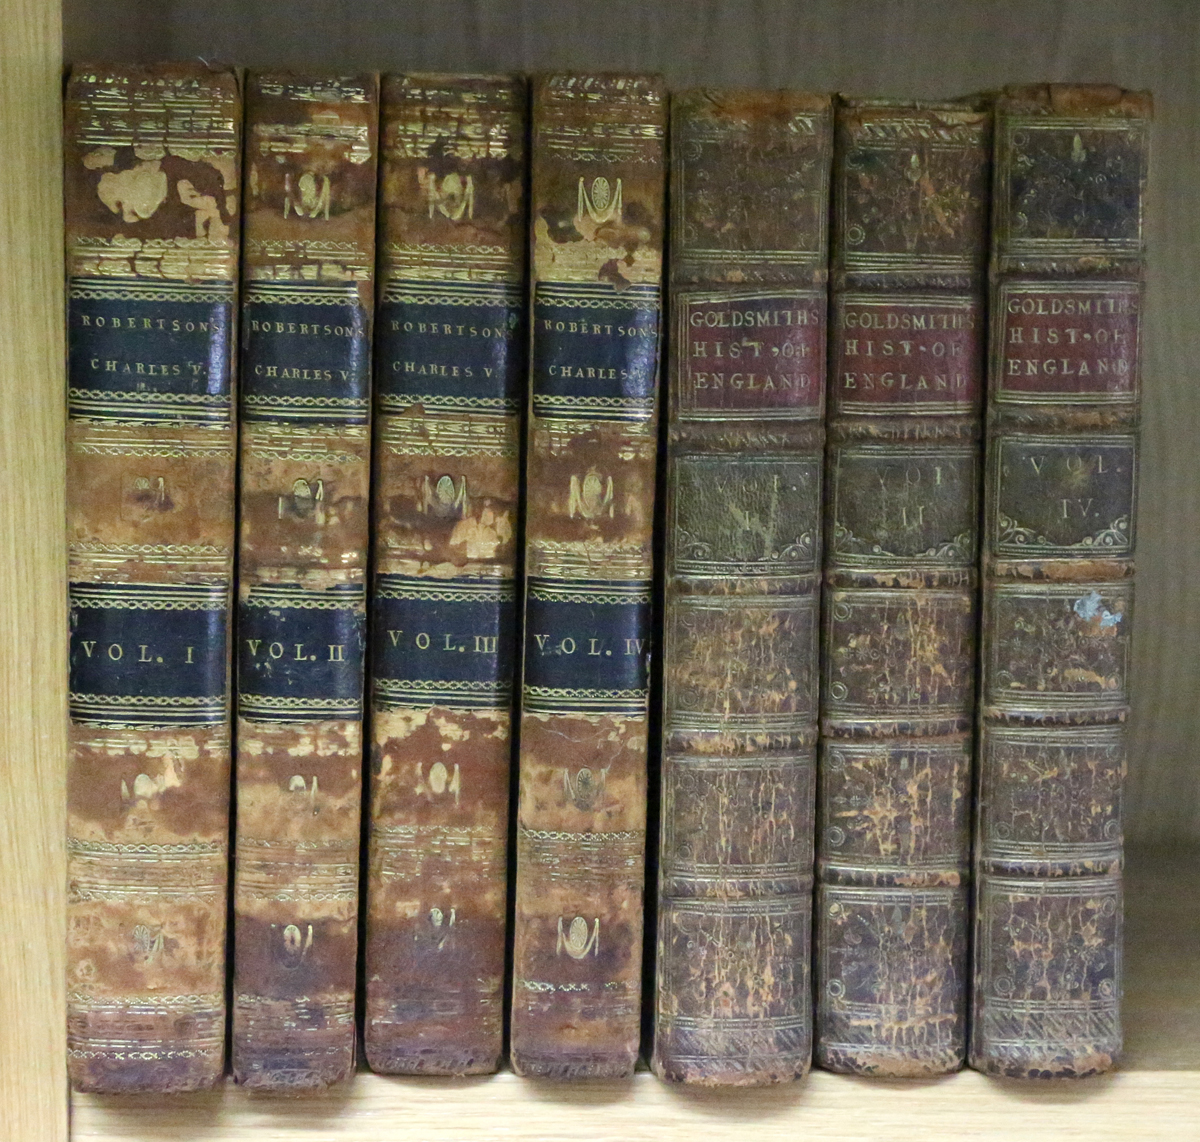 BINDINGS. - William ROBERTSON. The History of Scotland. London: T. Cadell, 1794. 2 vols., fourteenth - Image 2 of 4